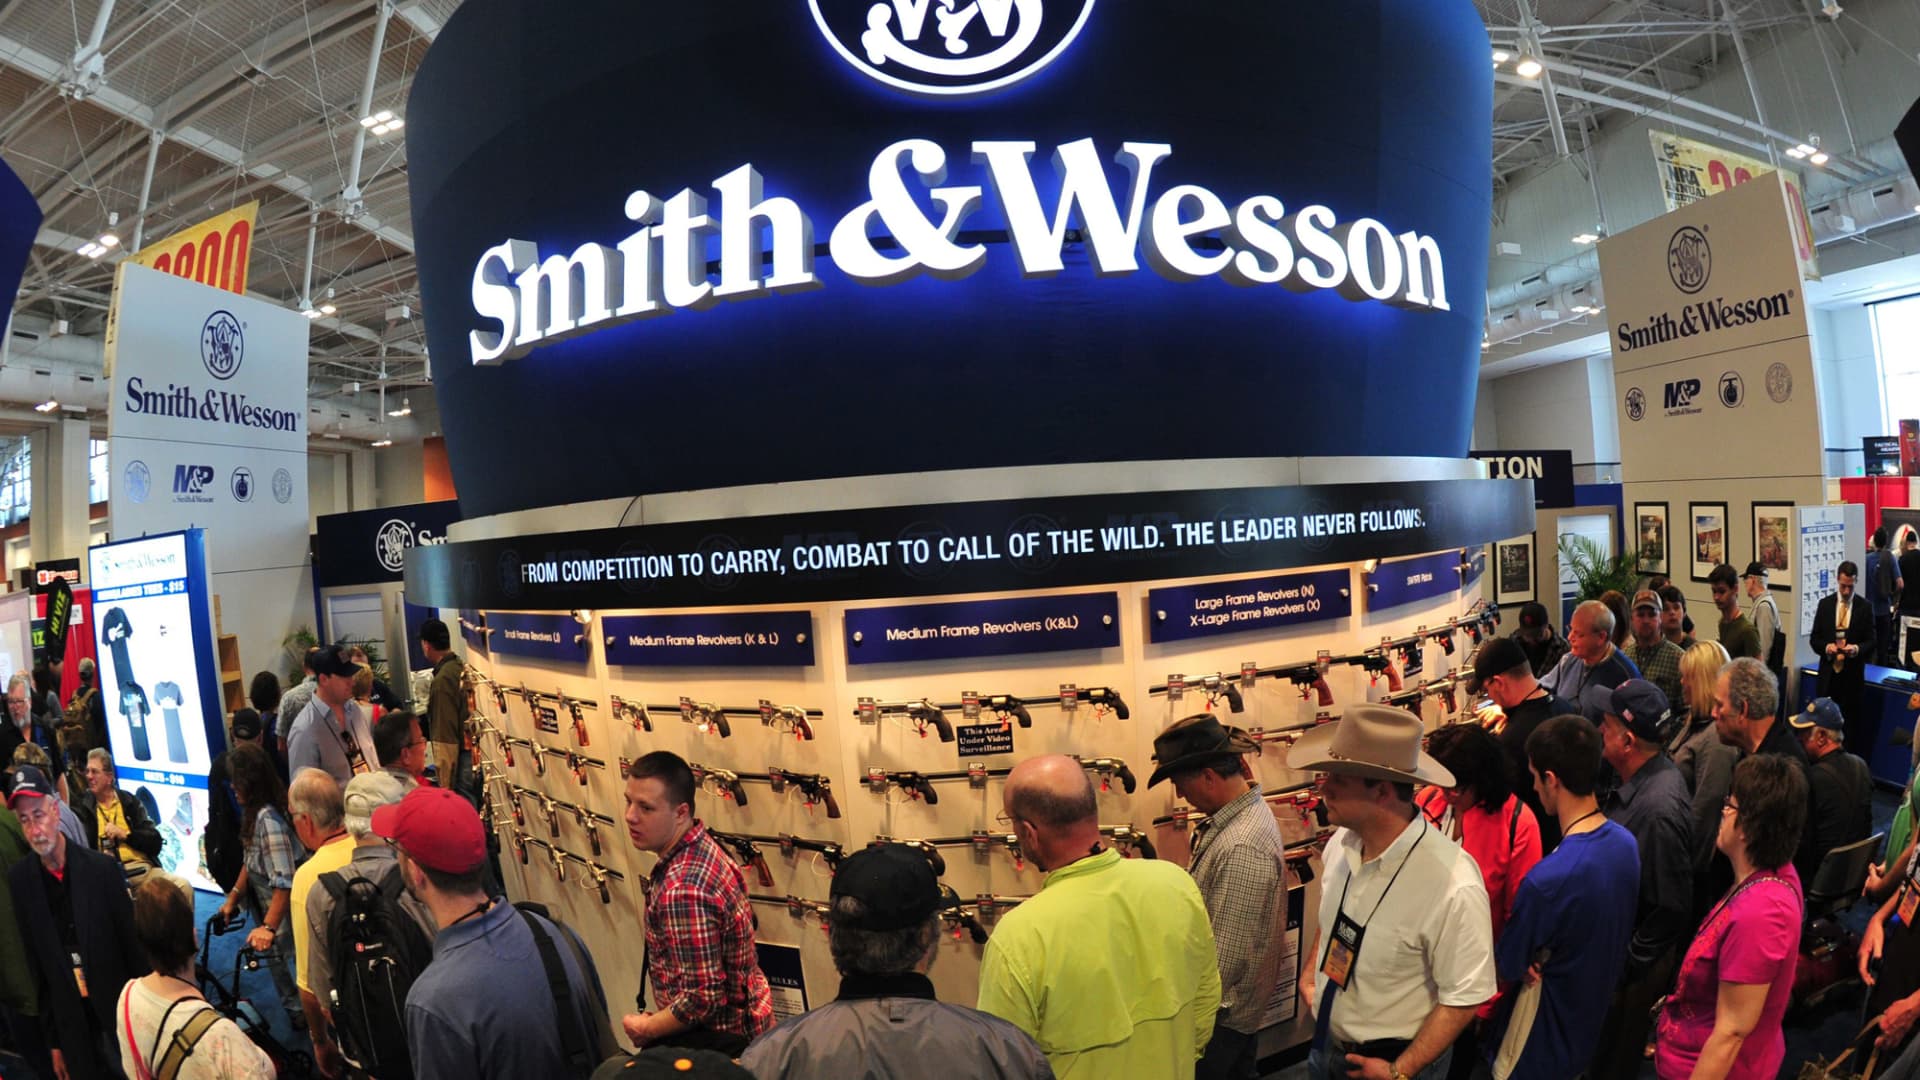 Smith & Wesson CEO faces backlash after he blamed politicians for gun violence